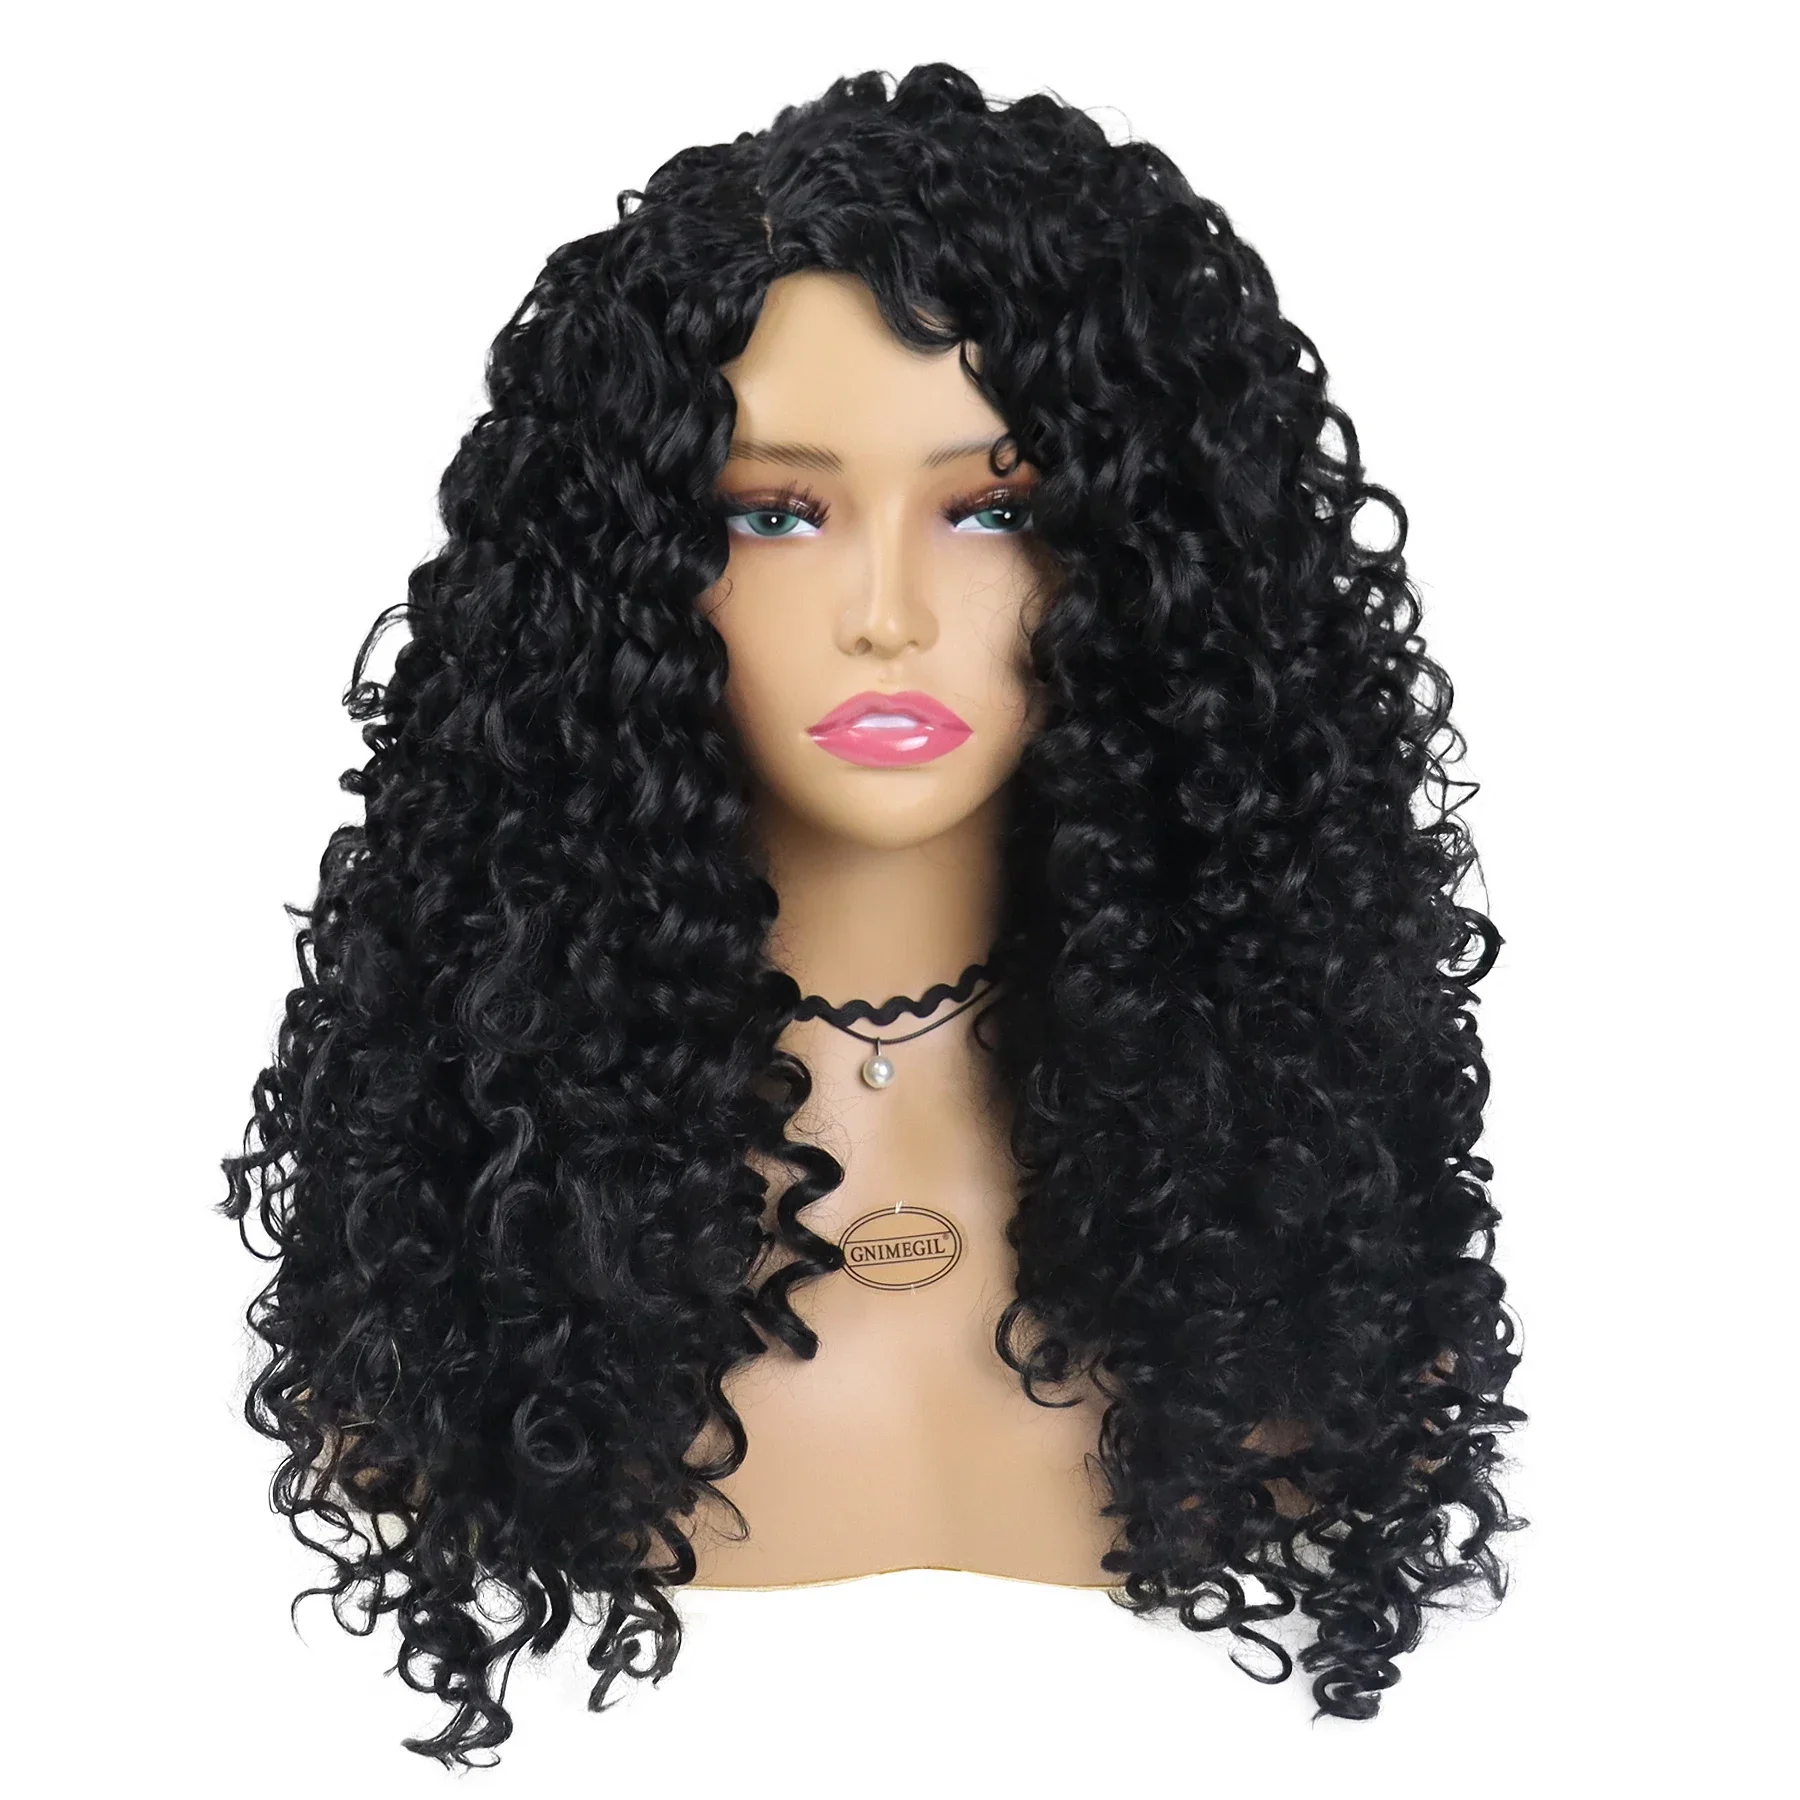 GNIMEGIL Synthetic Long Curly Wig for Woman Big Volume Fluffy Wave Wigs for - £31.03 GBP